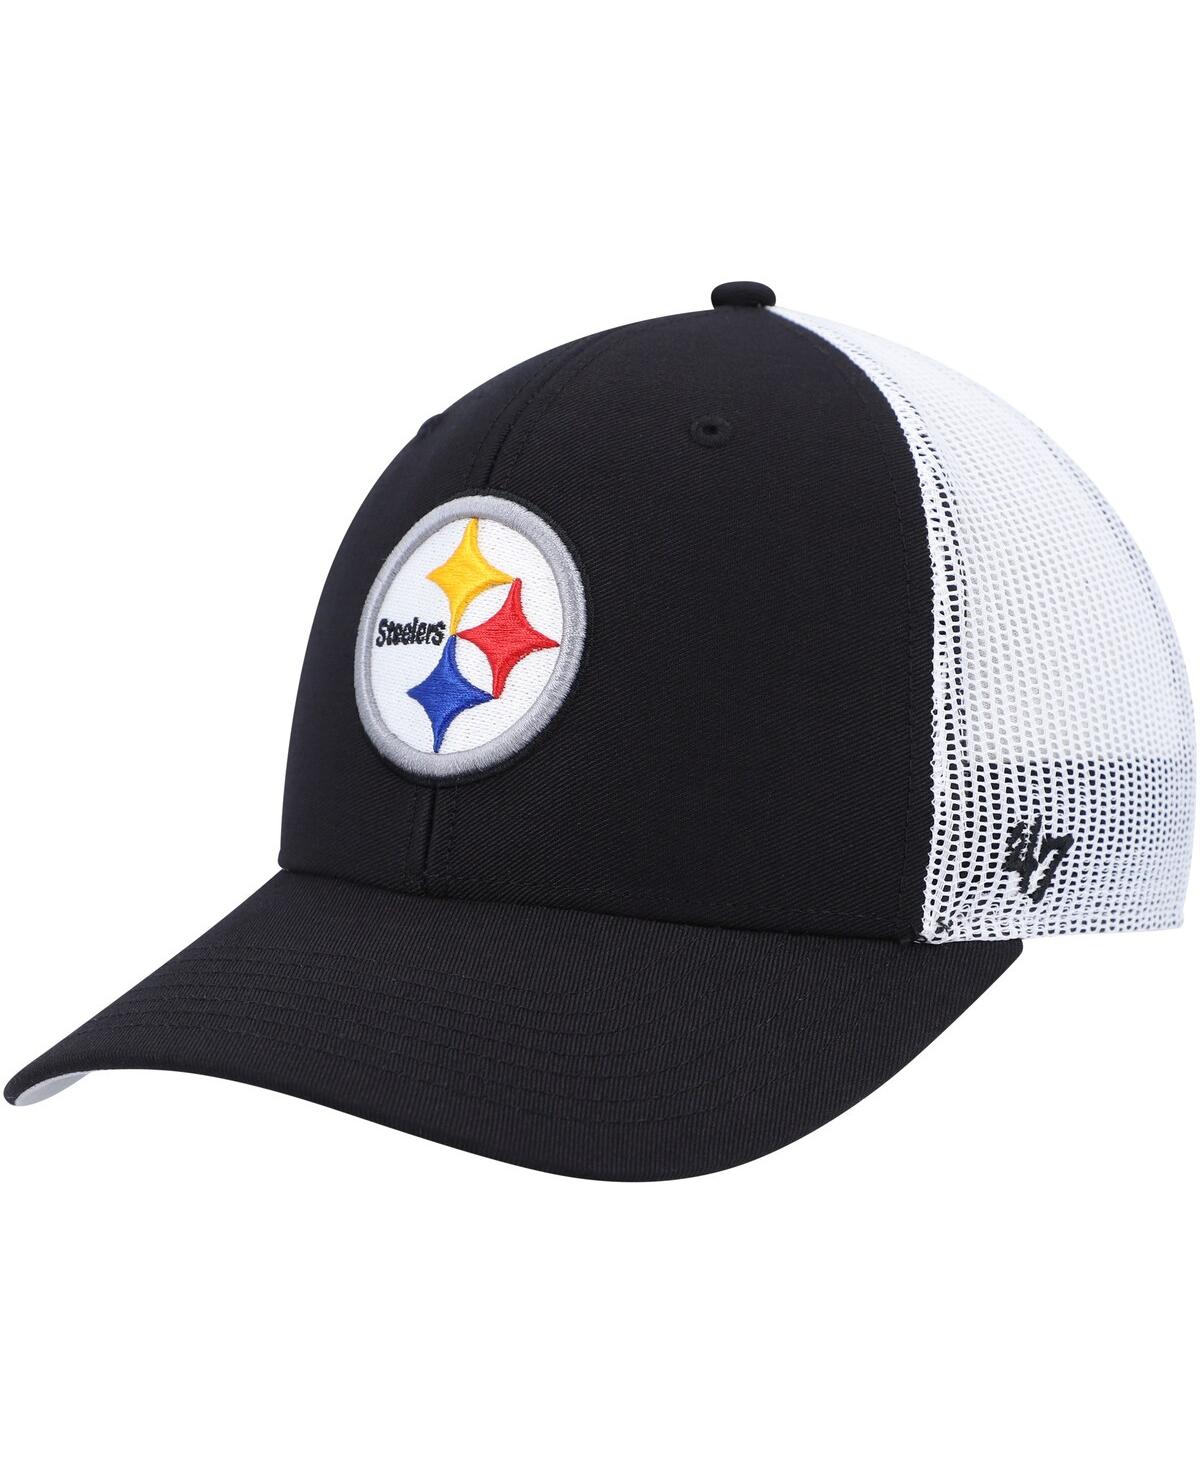 47 Brand Kids' Youth Boys And Girls ' Black, White Pittsburgh Steelers Adjustable Trucker Hat In Black,white